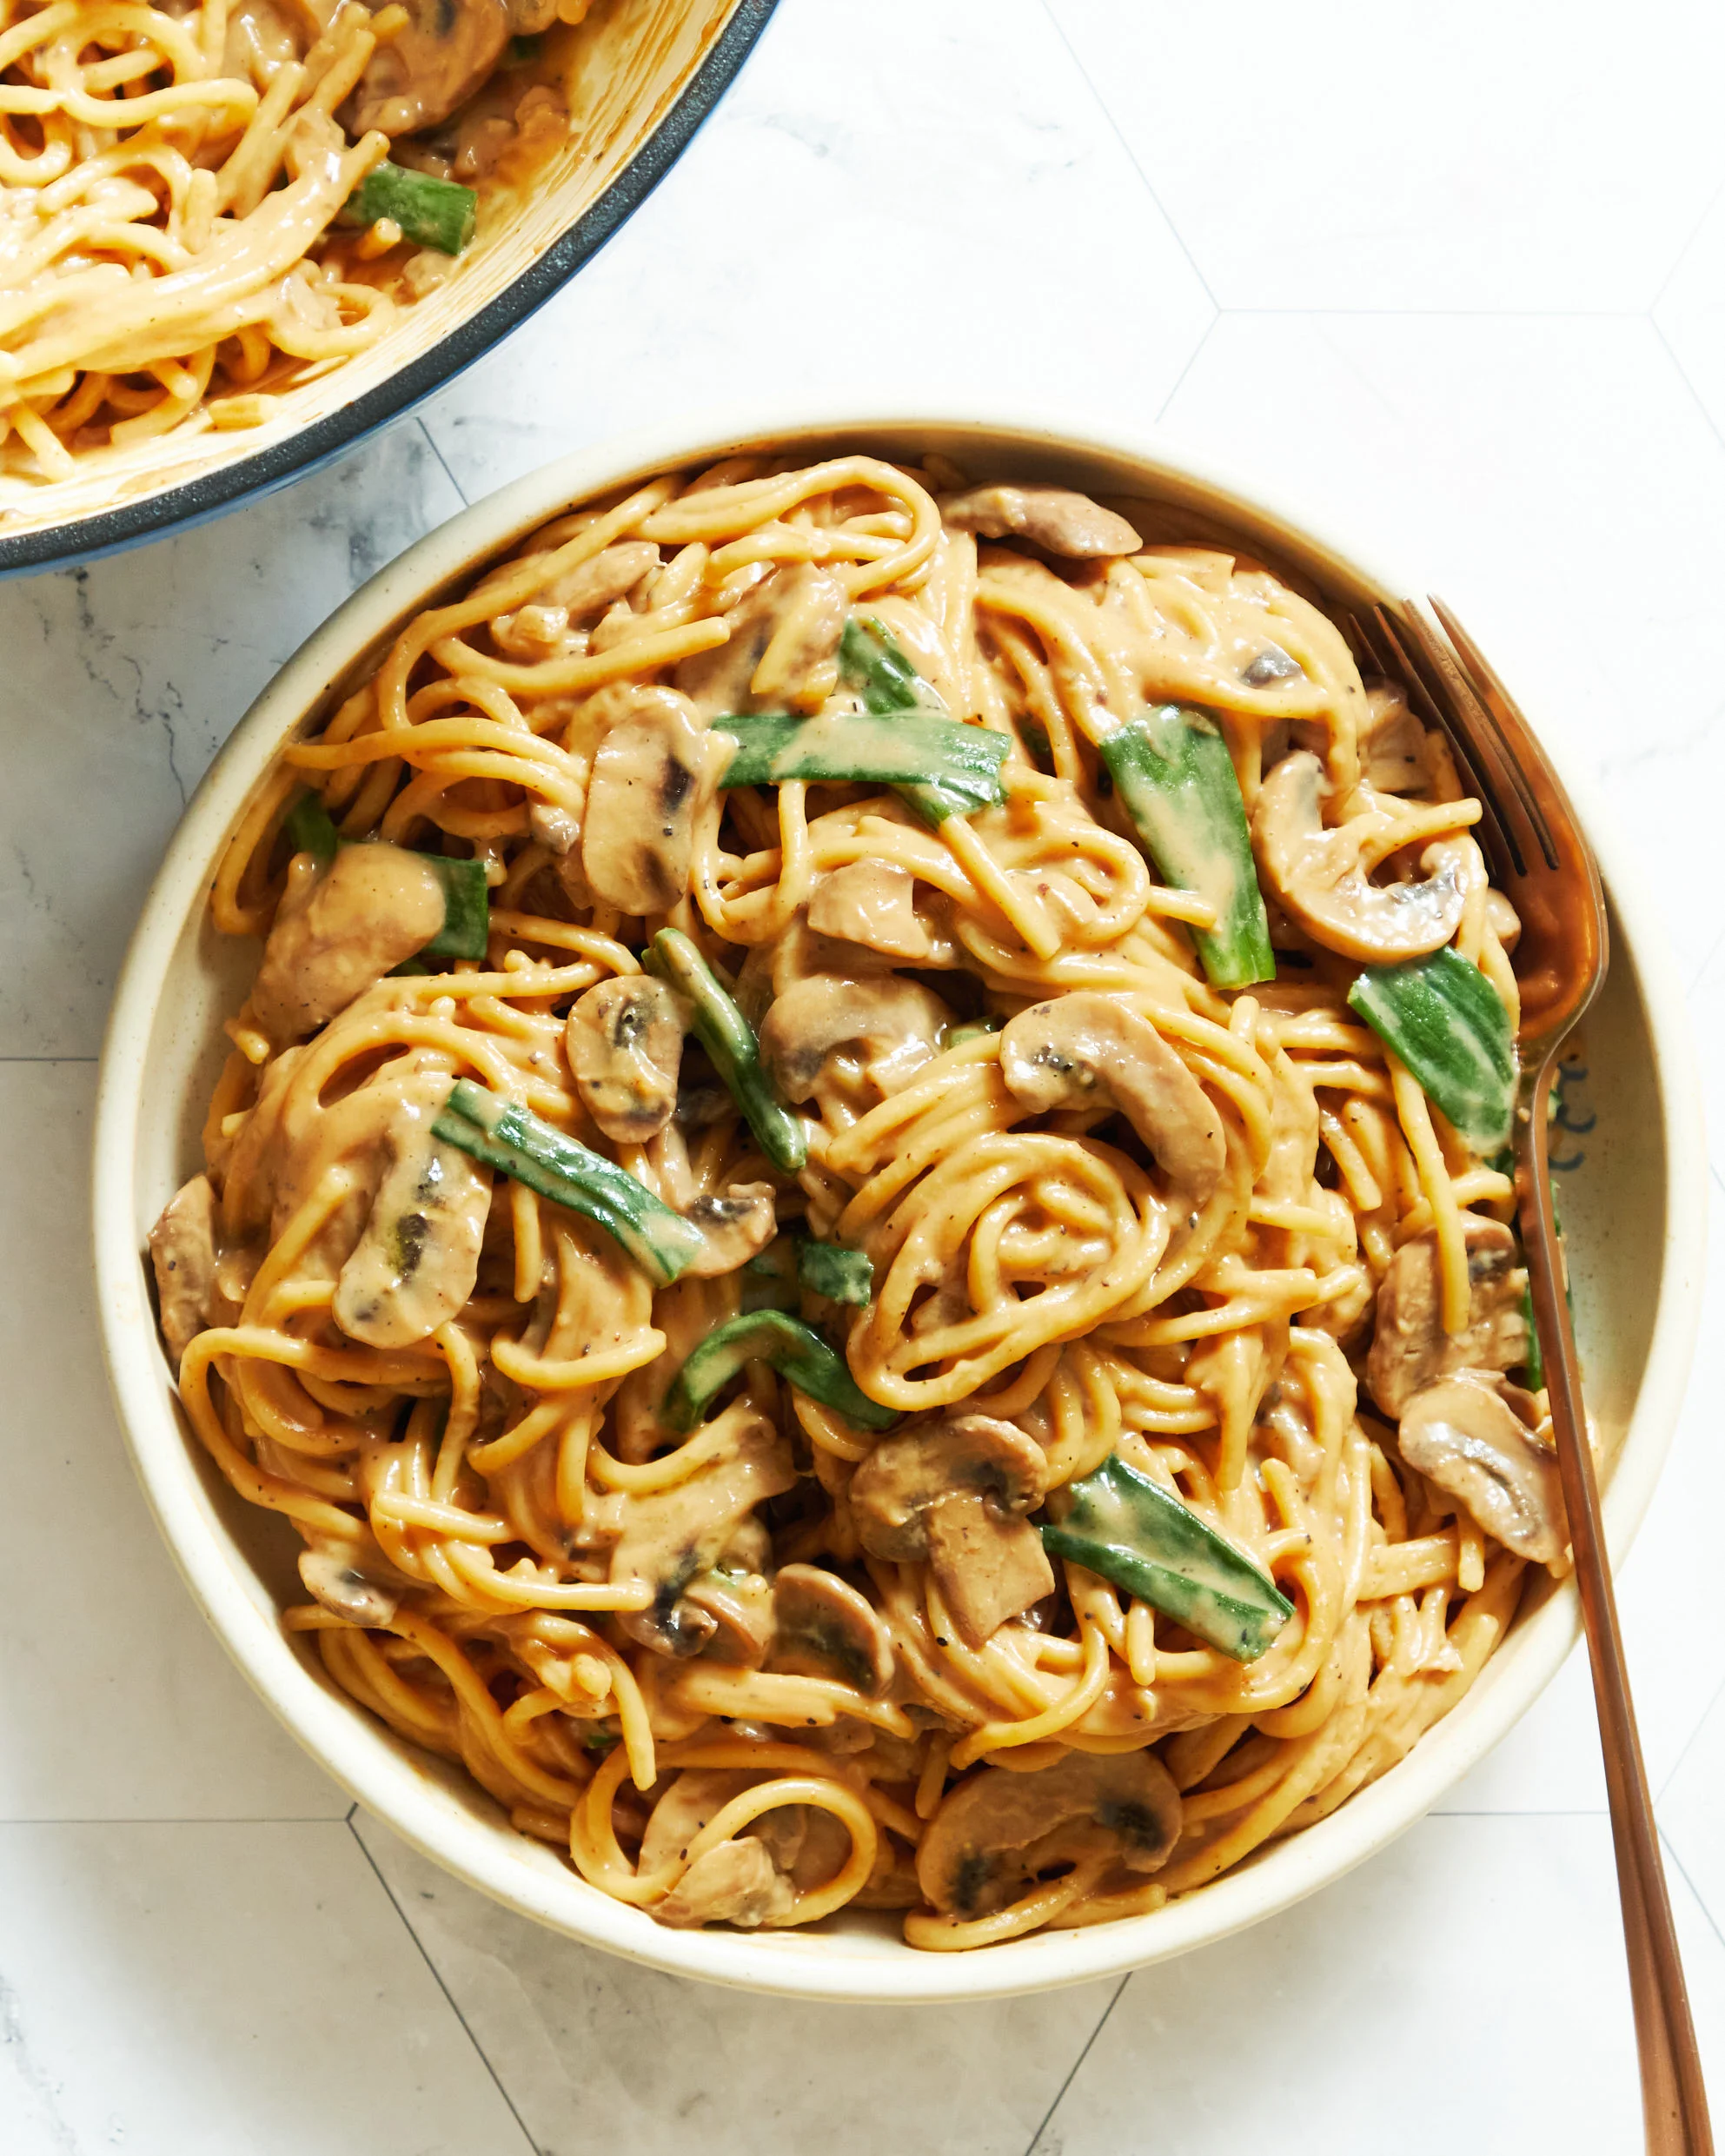 Creamy miso pasta with chicken and mushrooms